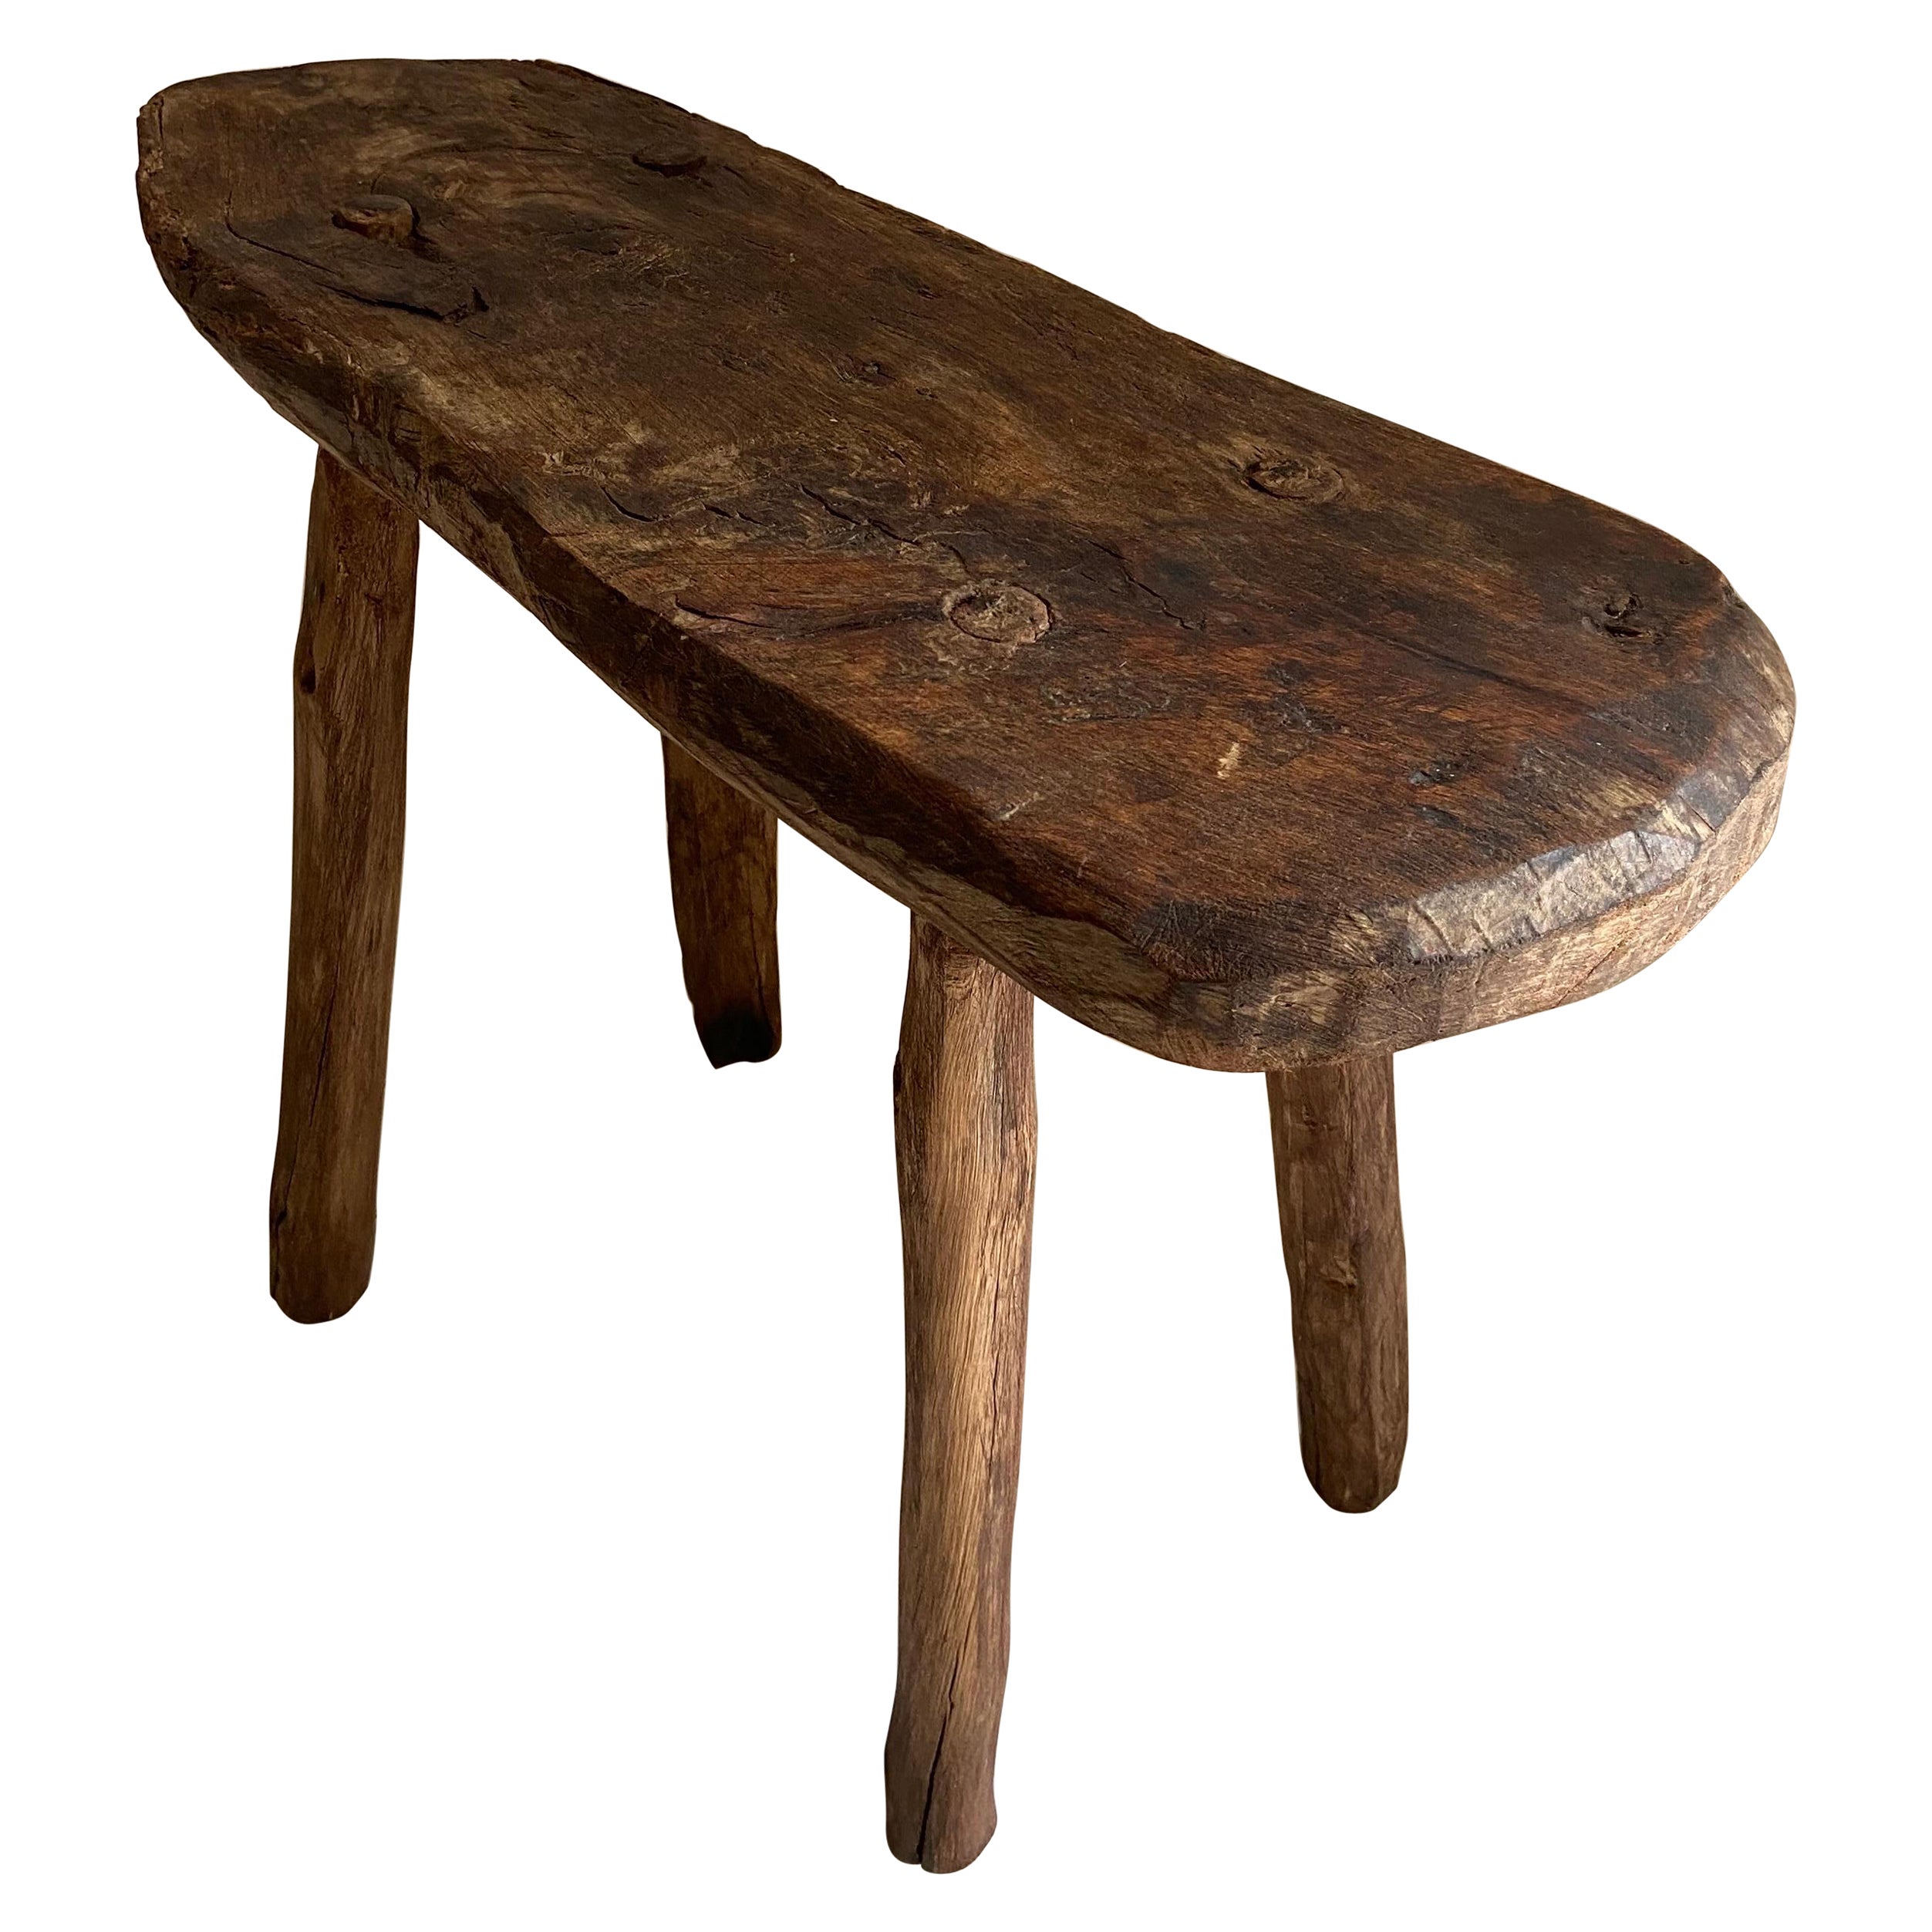 Mid 20th Century Hardwood Stool from Central Mexico